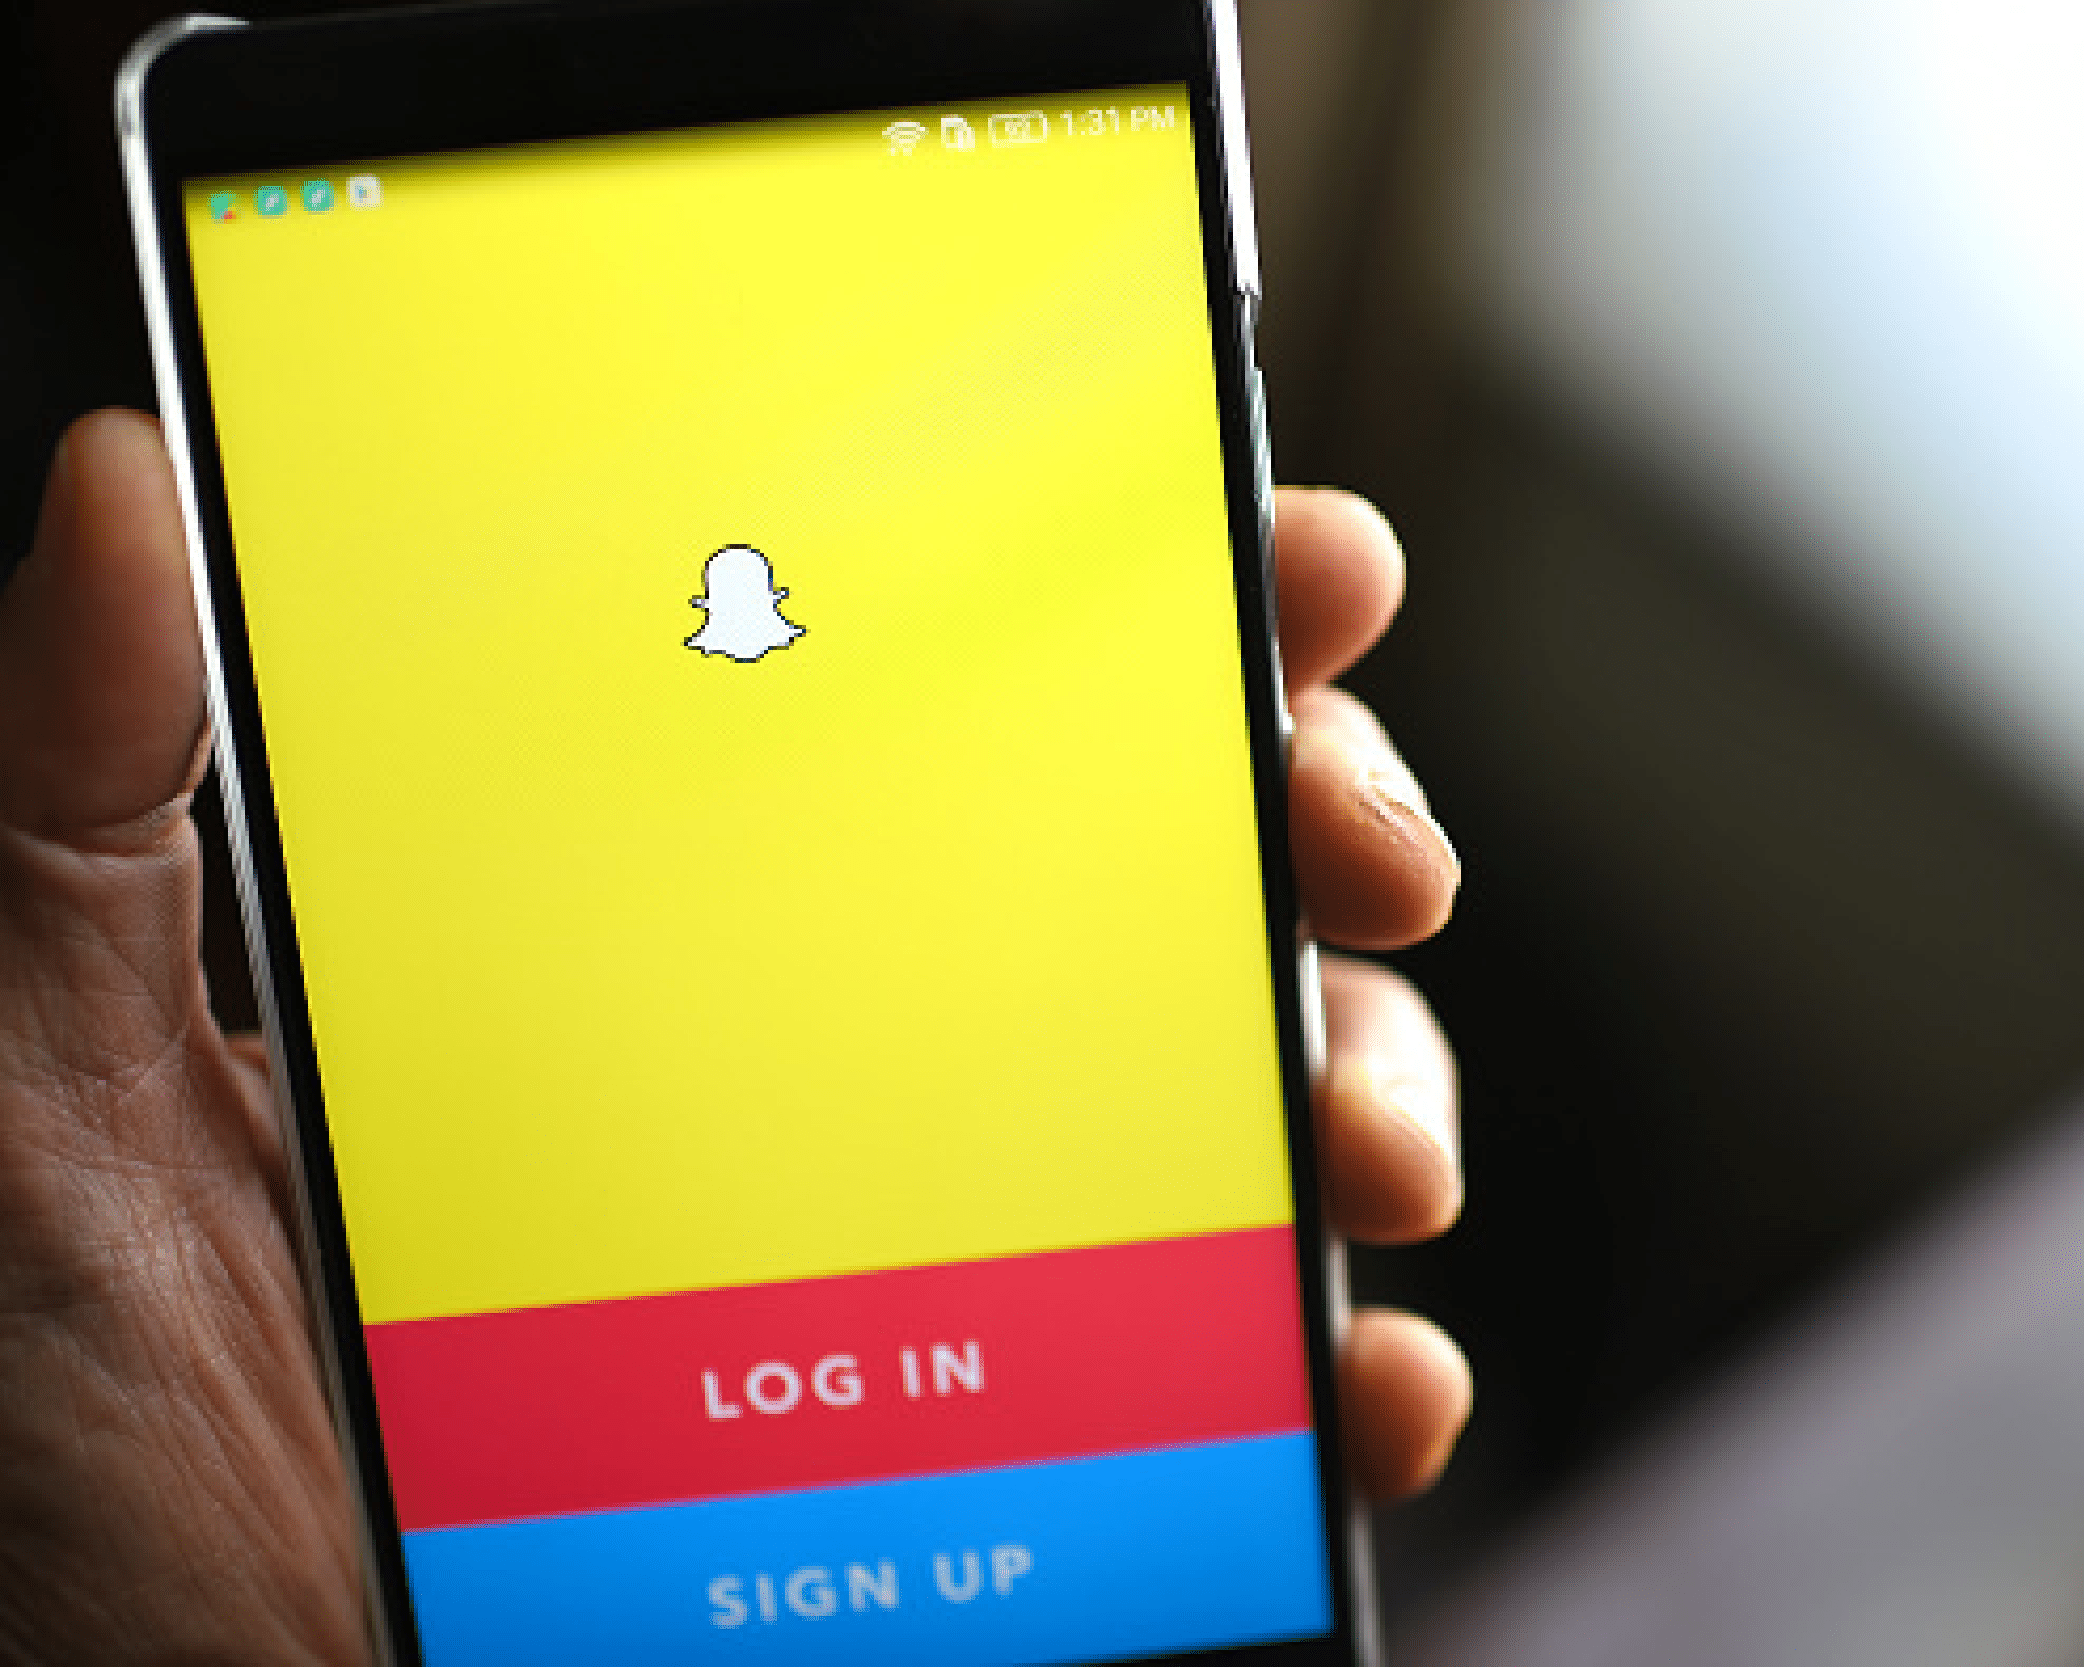 Snapchat+ Users Get Personalized Homes on Snap Map, Pets in Chat, Quick Snaps and More